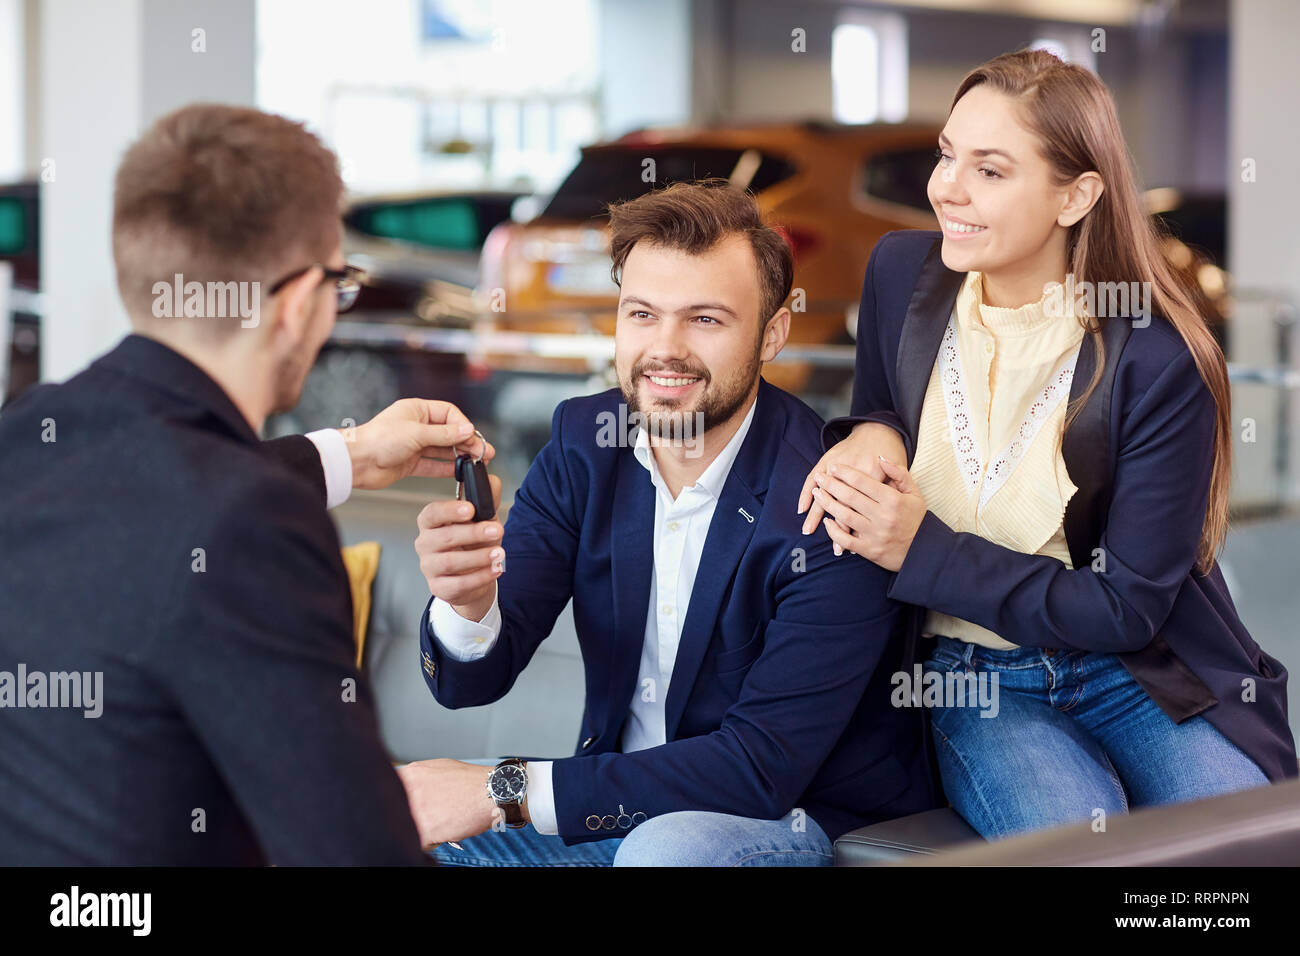 The dealer gives the keys to the new car to the customer Stock Photo